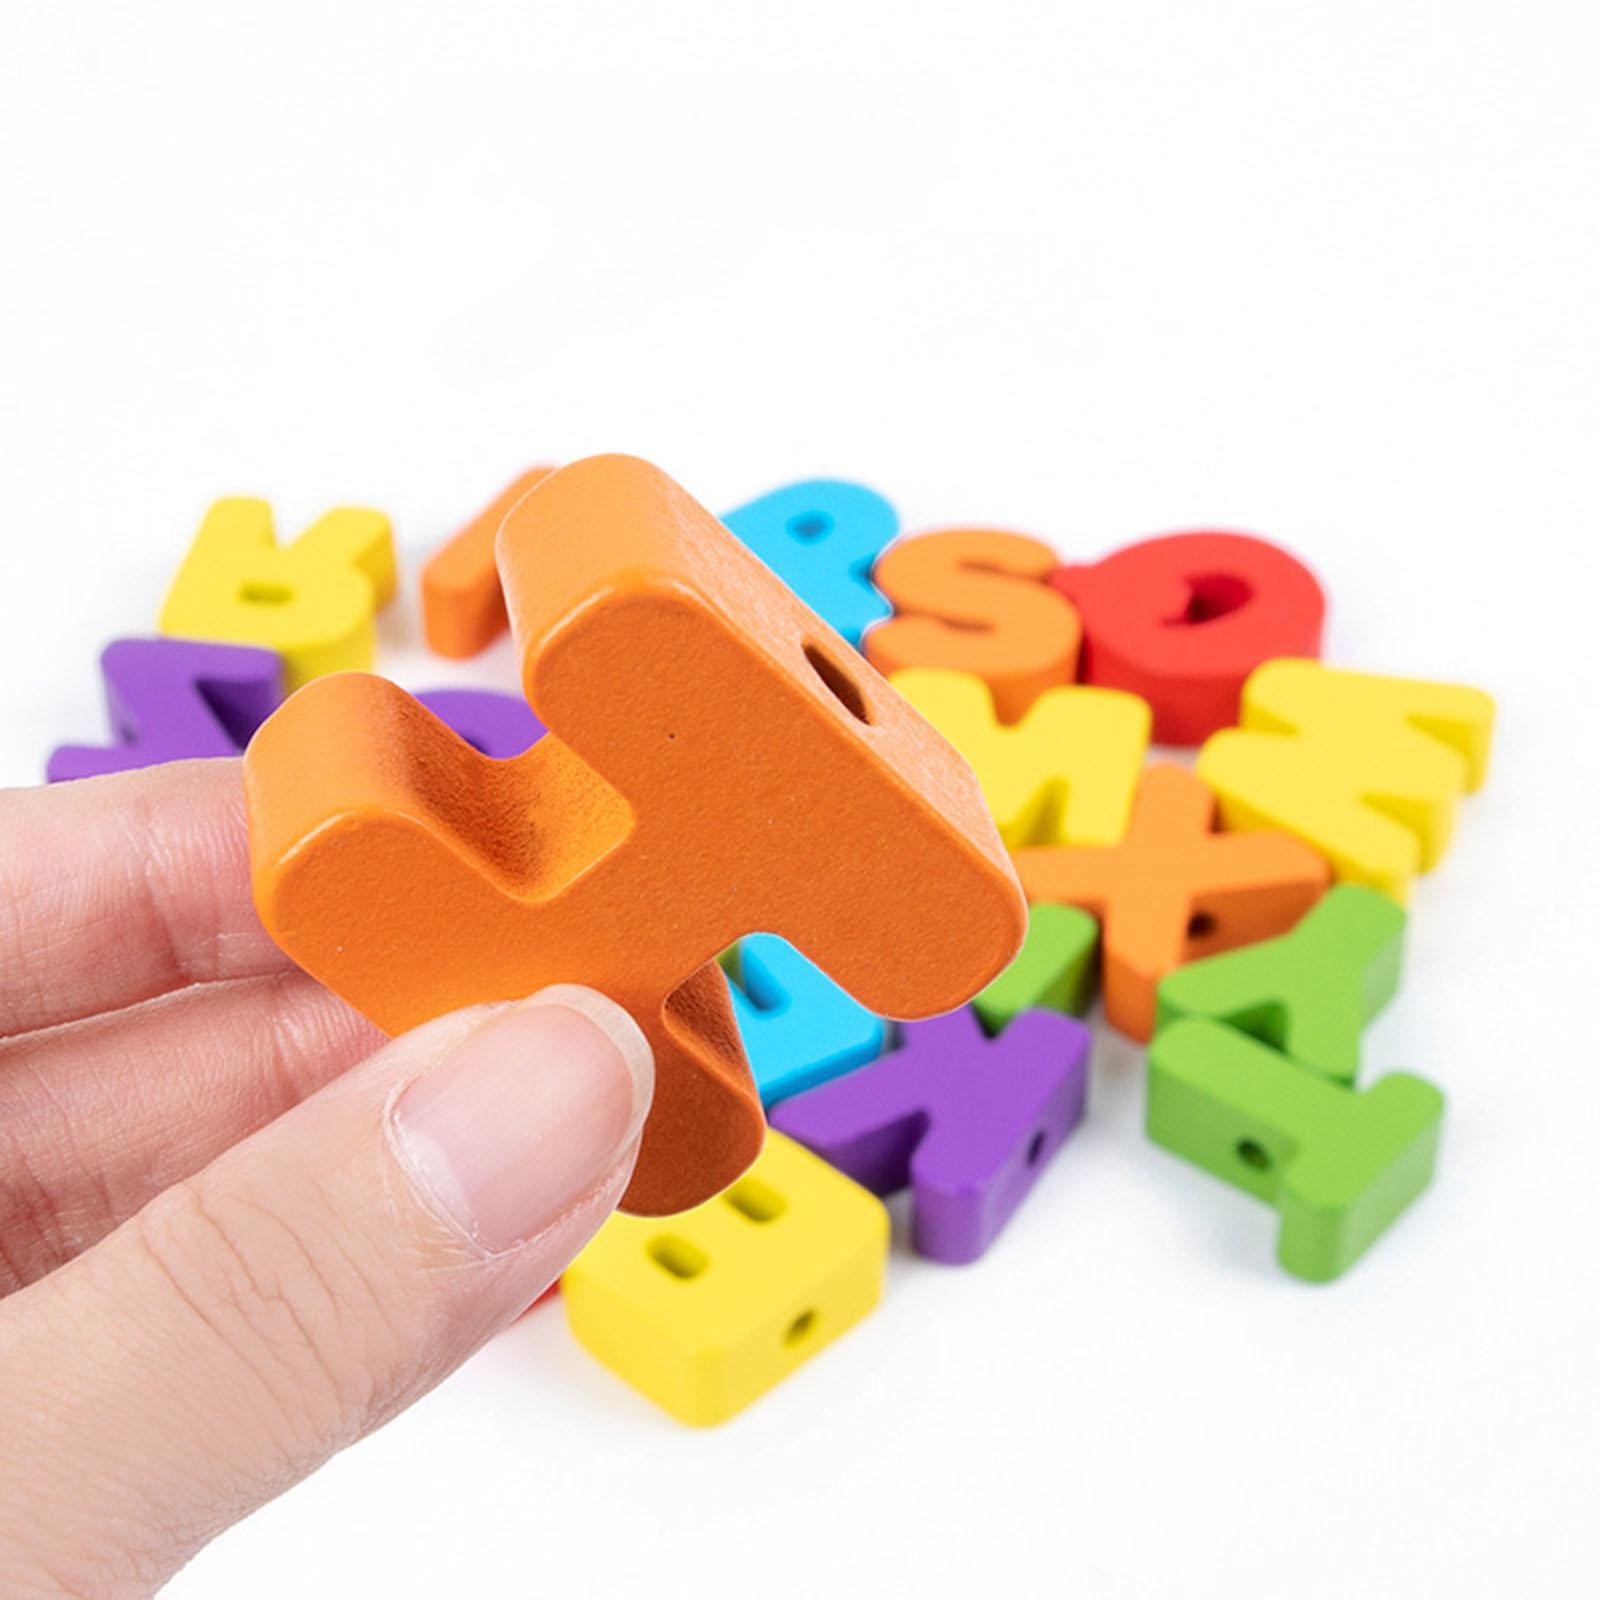 memory Game with Blocks Wooden Matching Game for Game